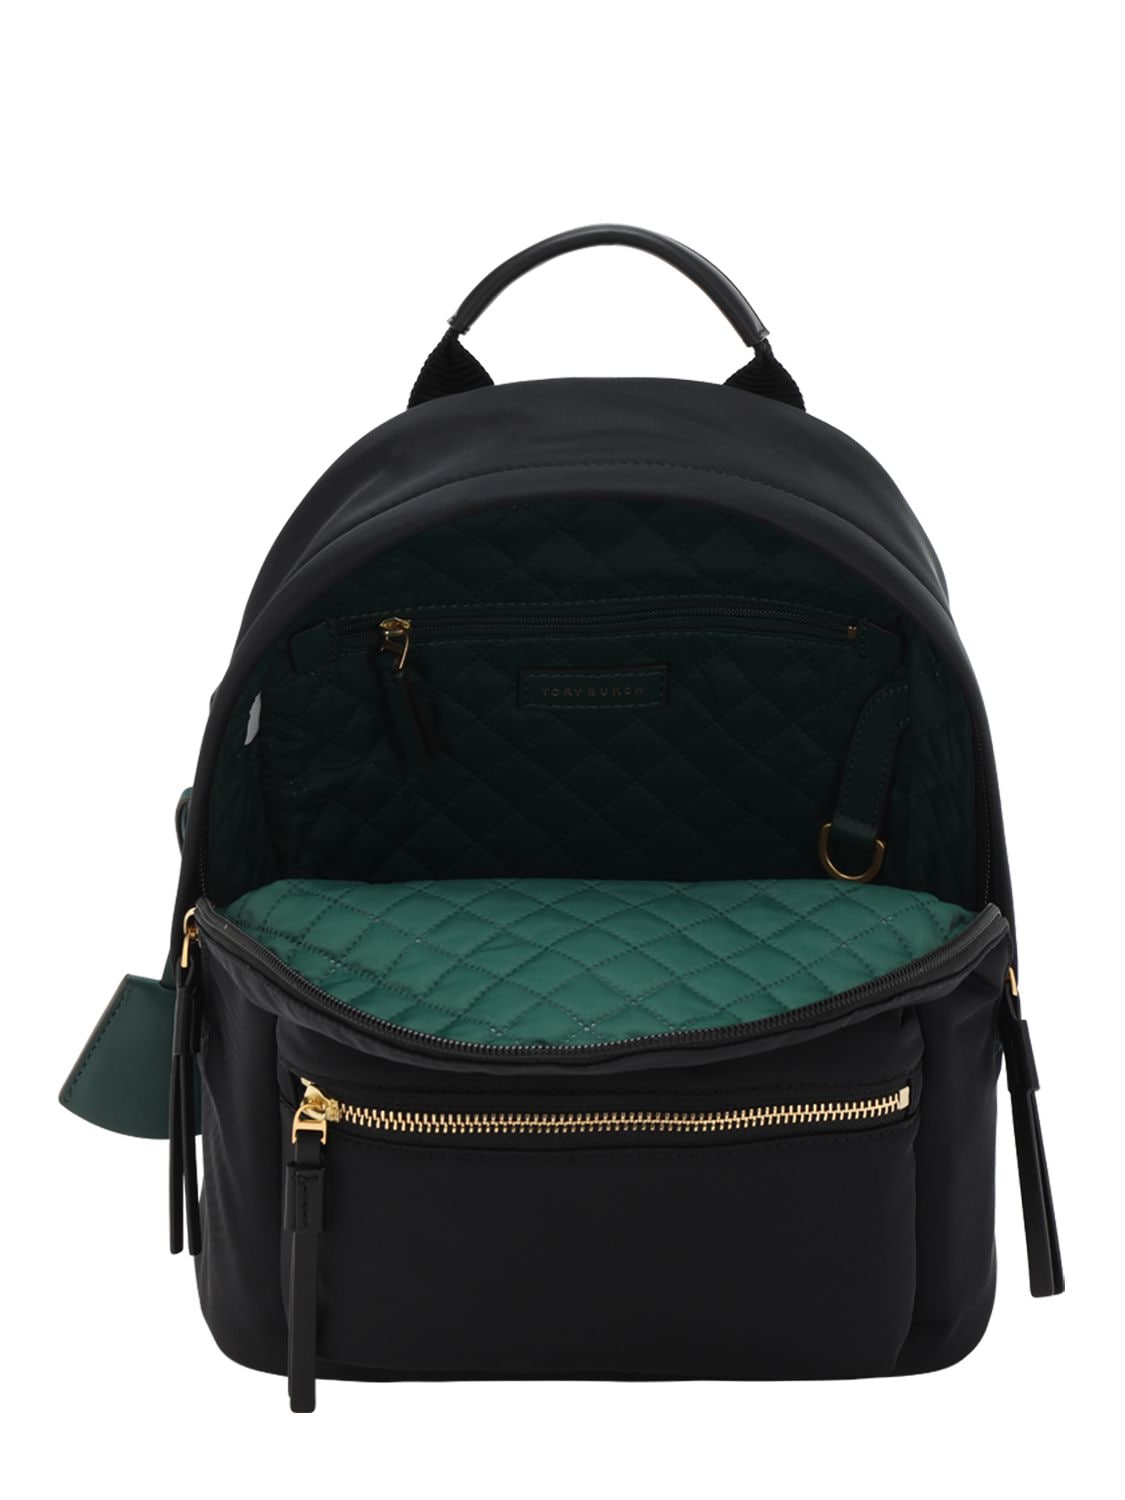 Tory Burch Piper Small Nylon Zip Backpack In 001 | ModeSens